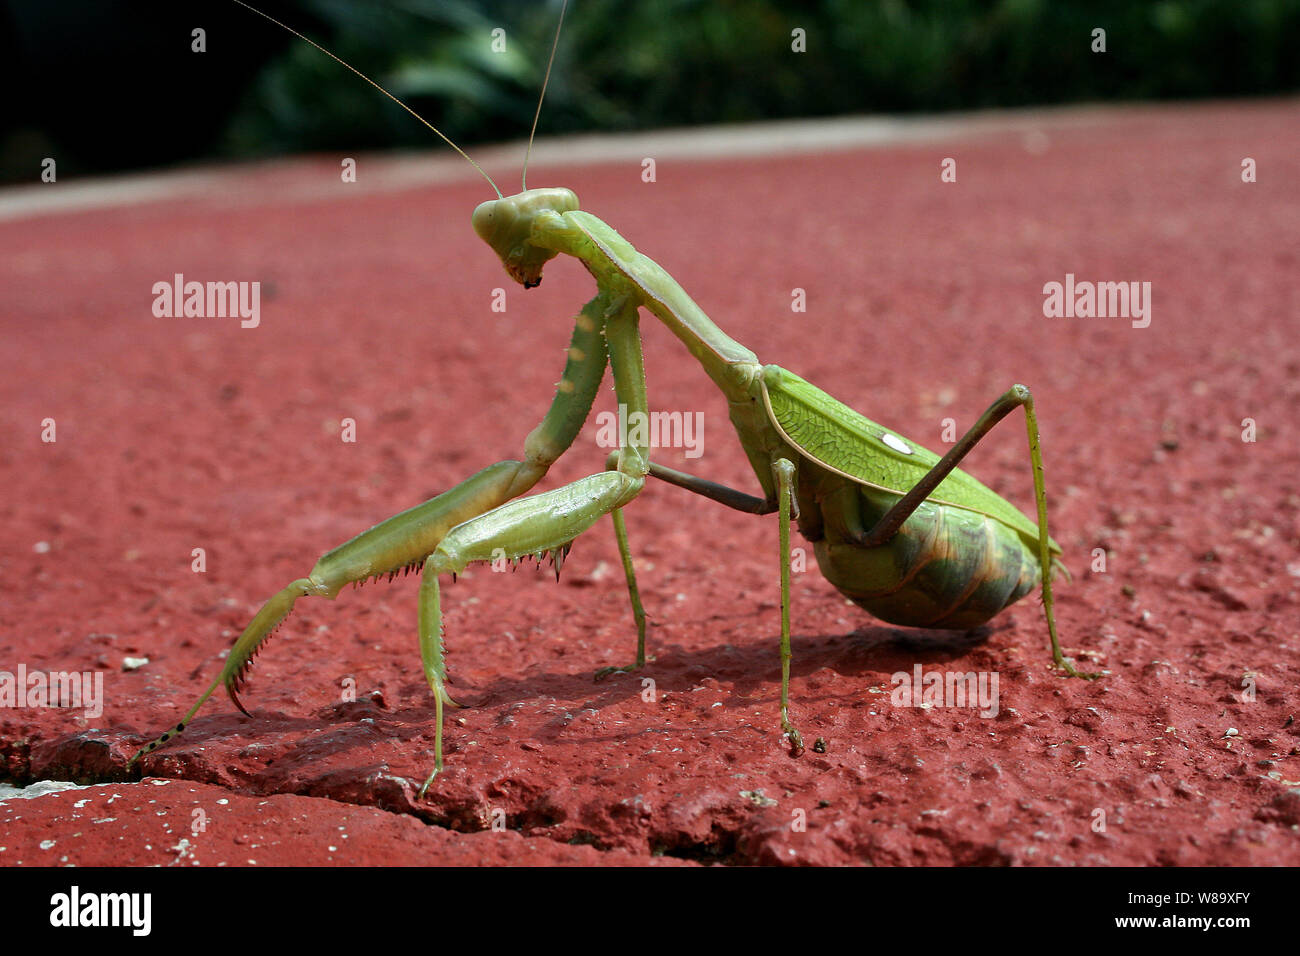 A close-up of a Praying Mantis, (Mantodea). The female has been known to eat the male after mating but not always. Stock Photo